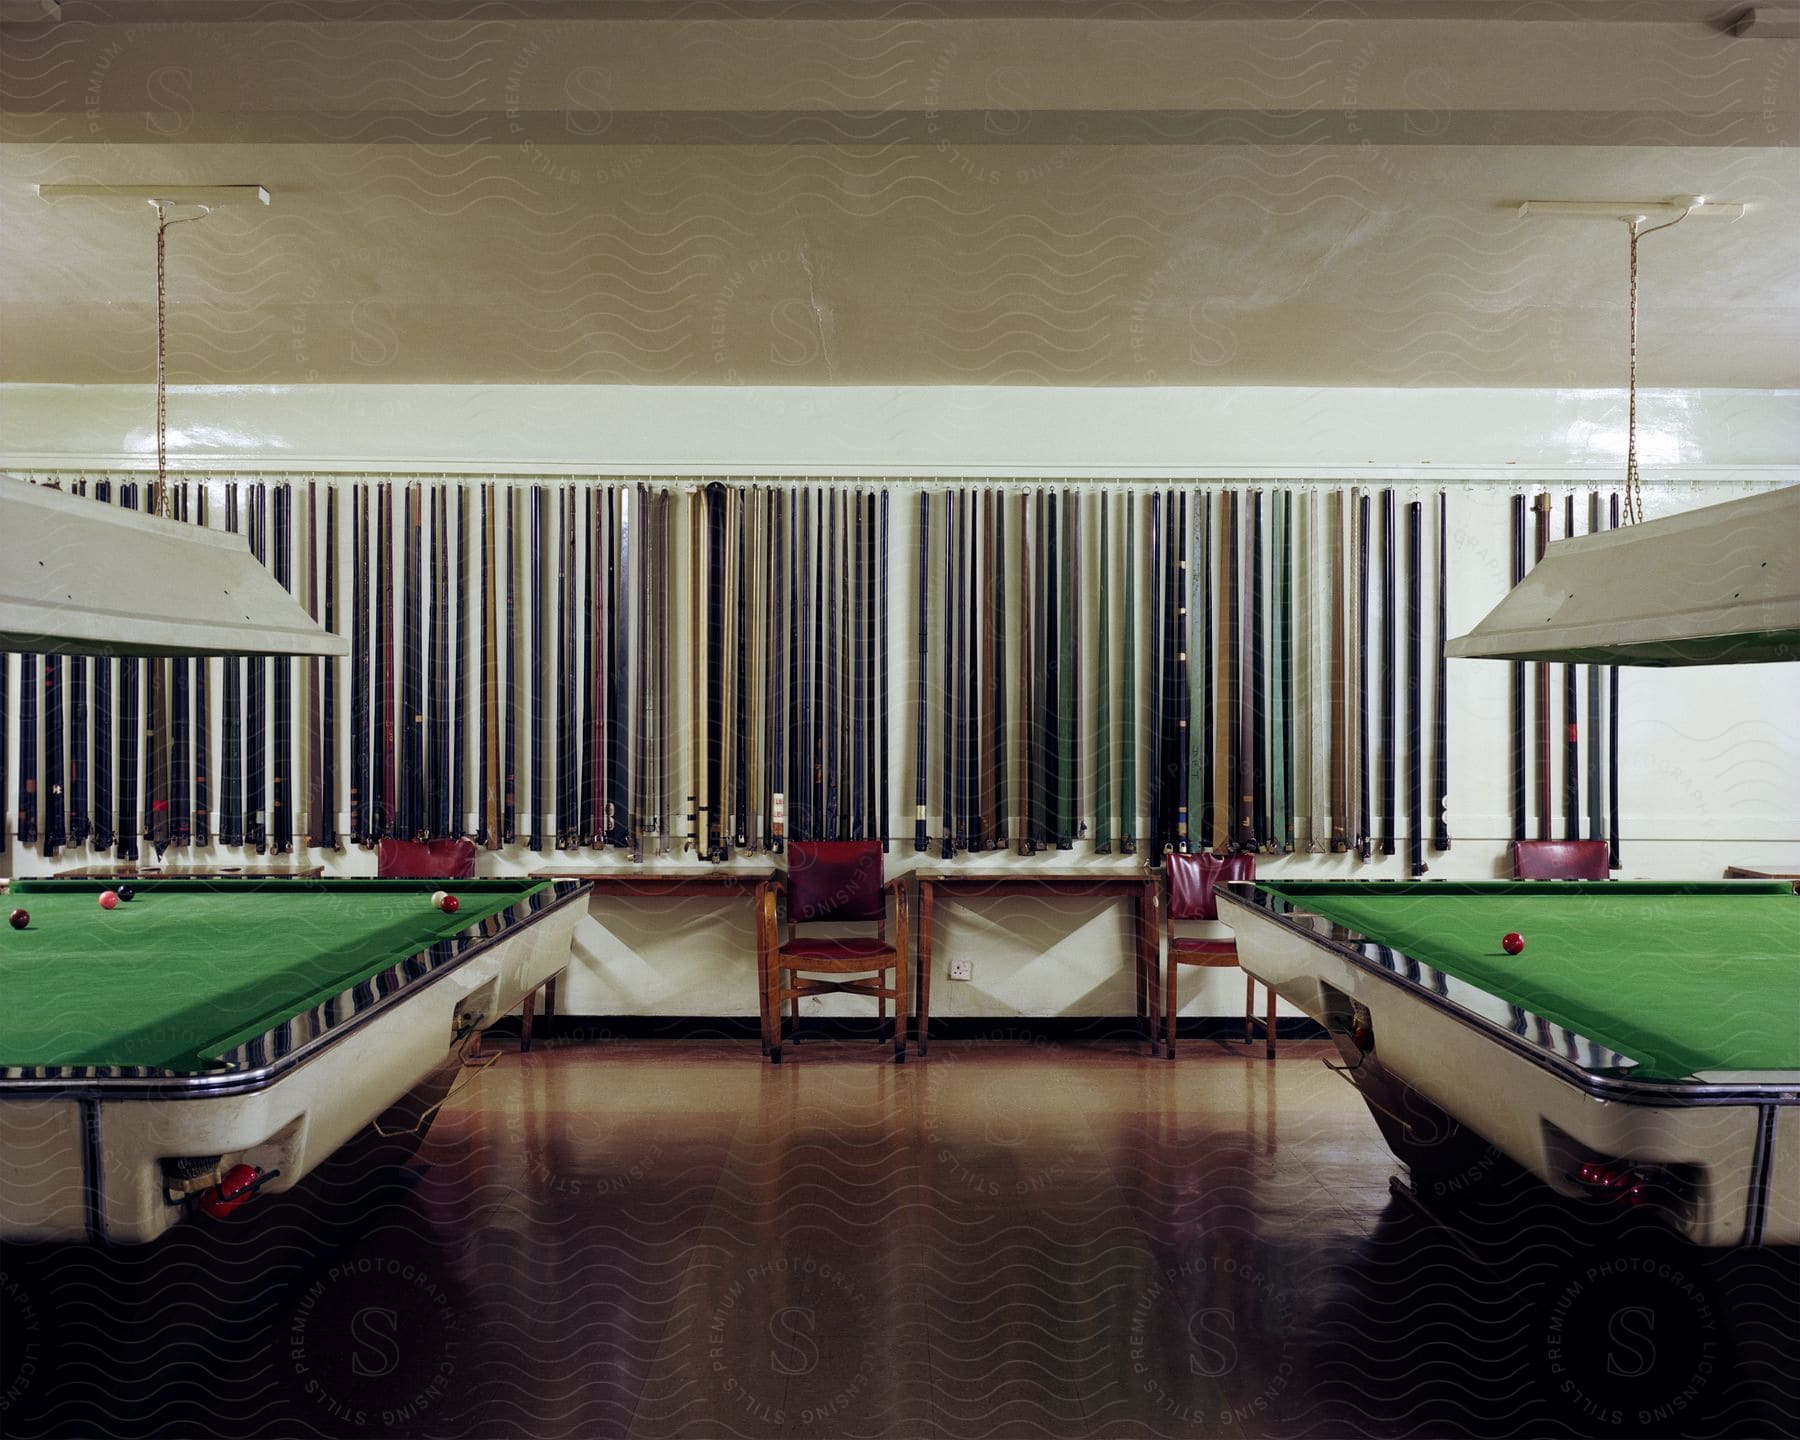 A pool table game room with pool sticks on the wall